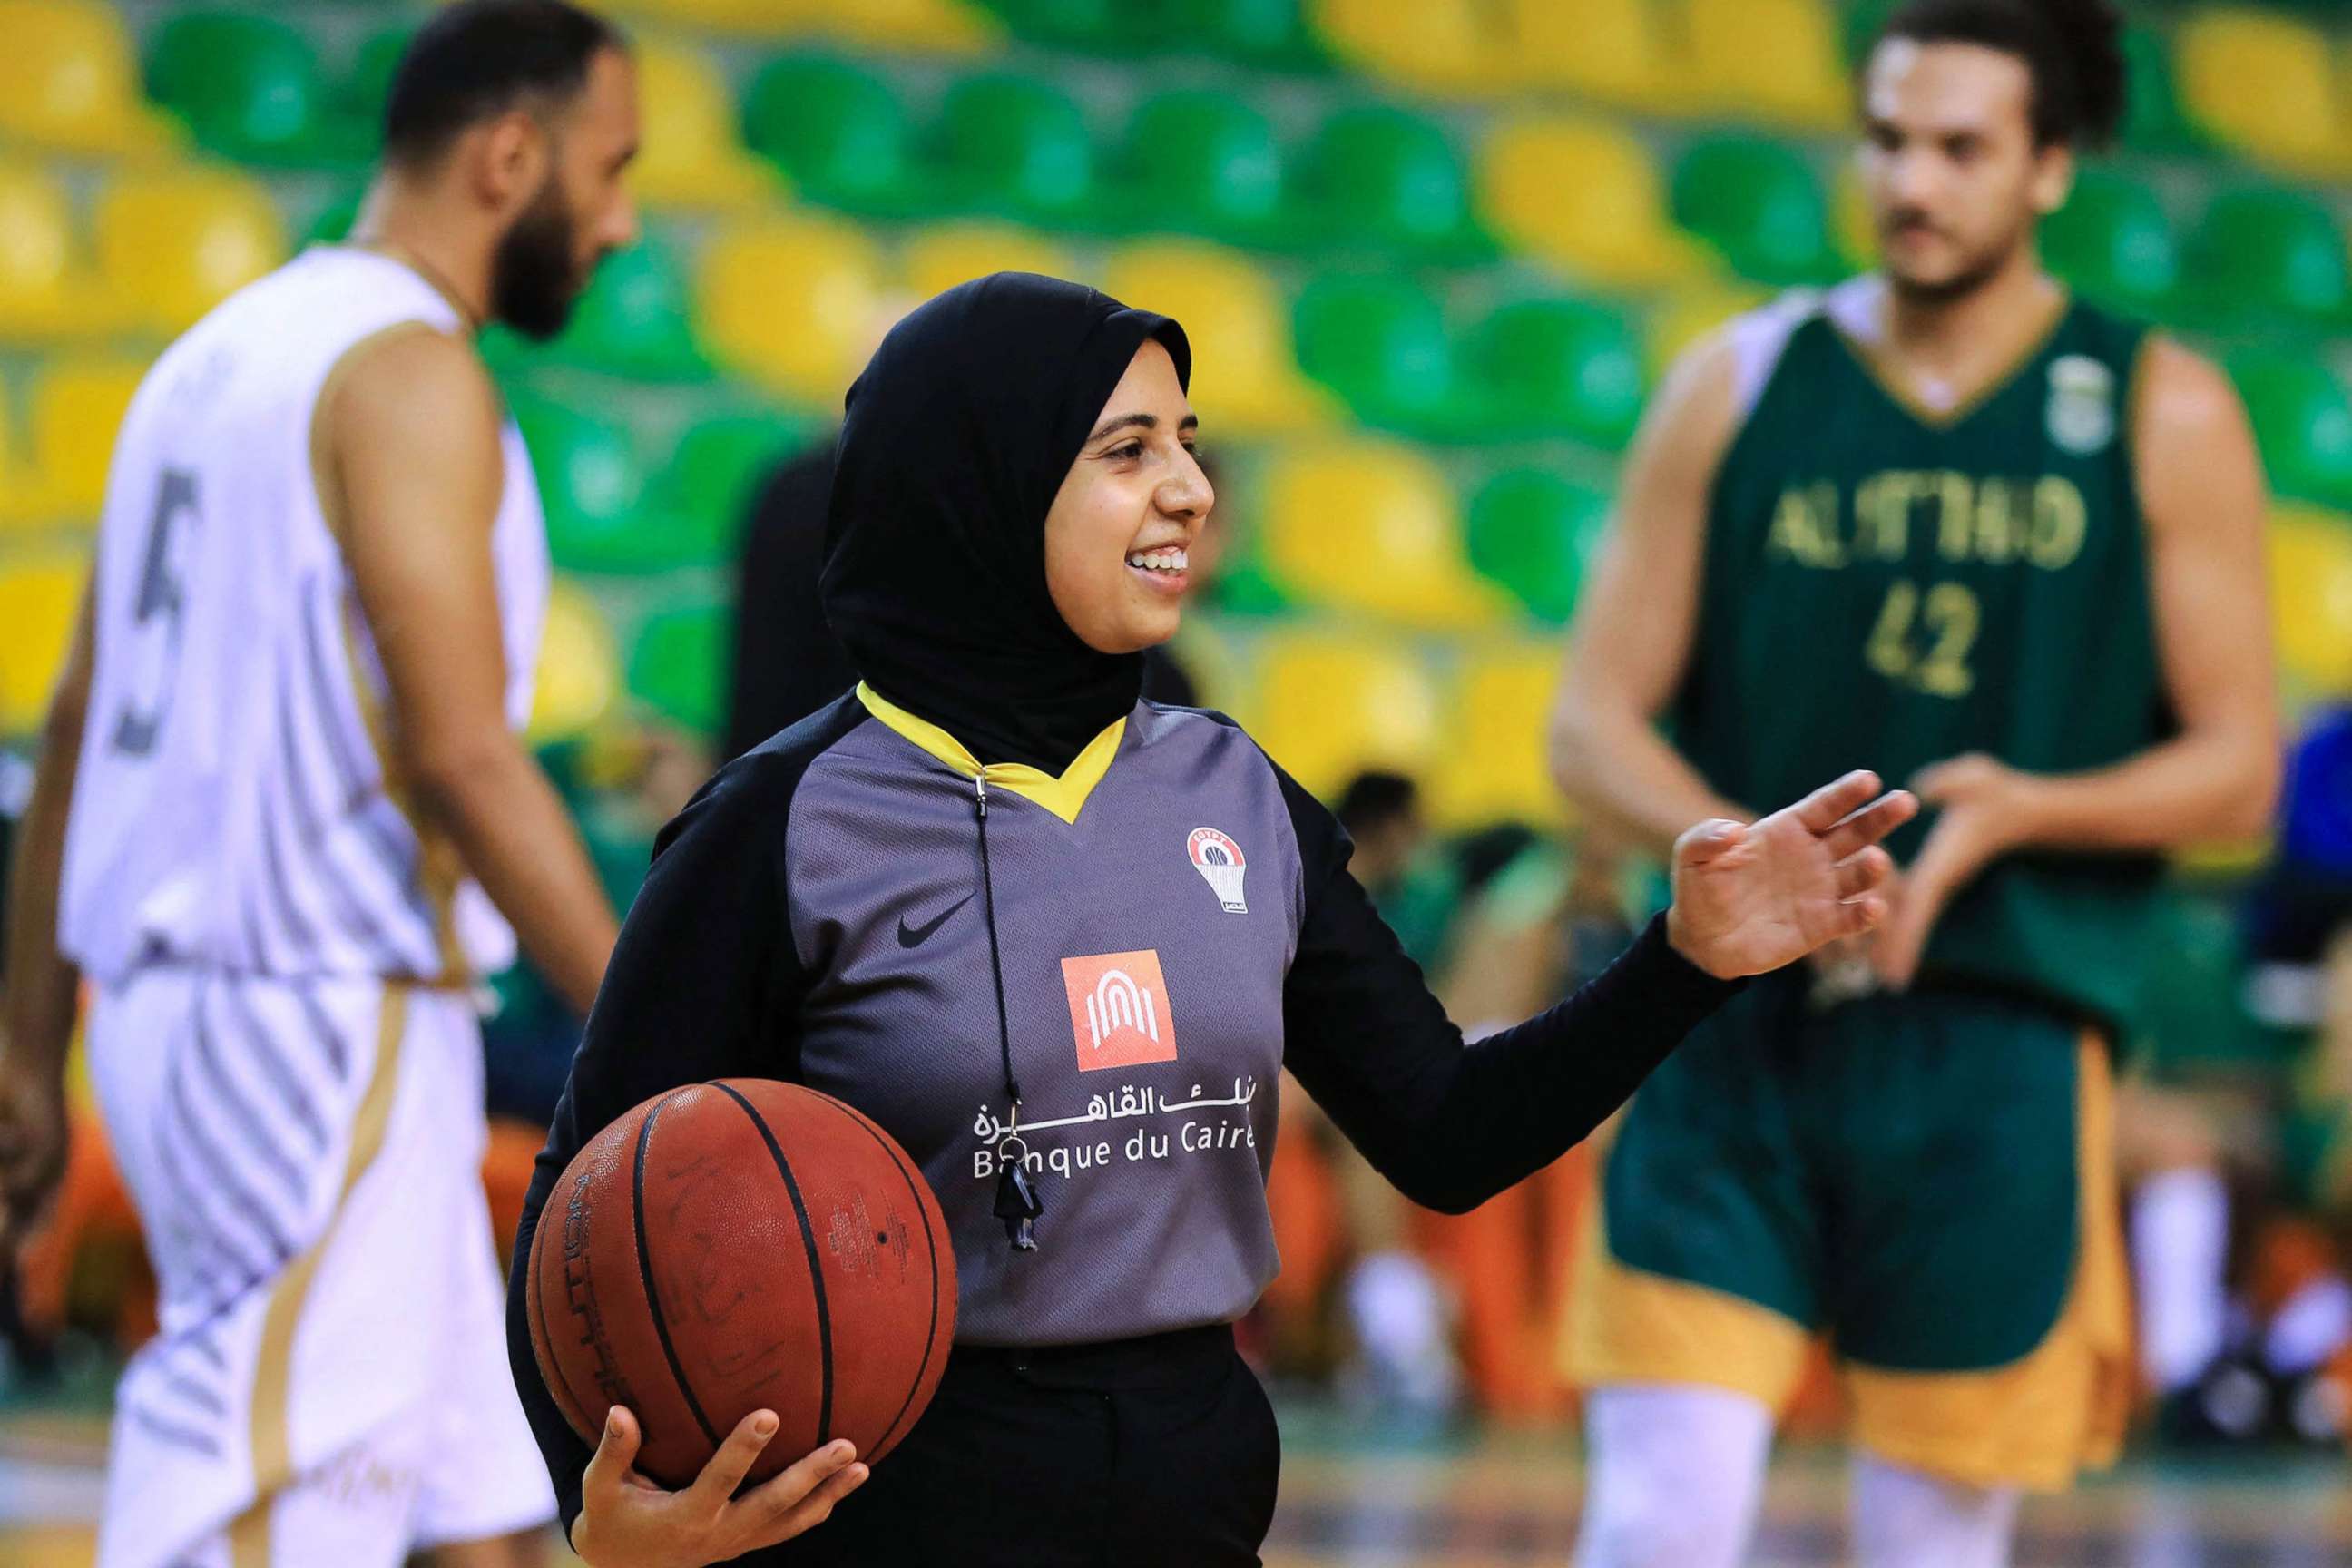 PHOTO: Egyptian Basketball referee Sarah Gamal gestures while holding a ball during a game in Alexandria, Egypt, April 17, 2021.